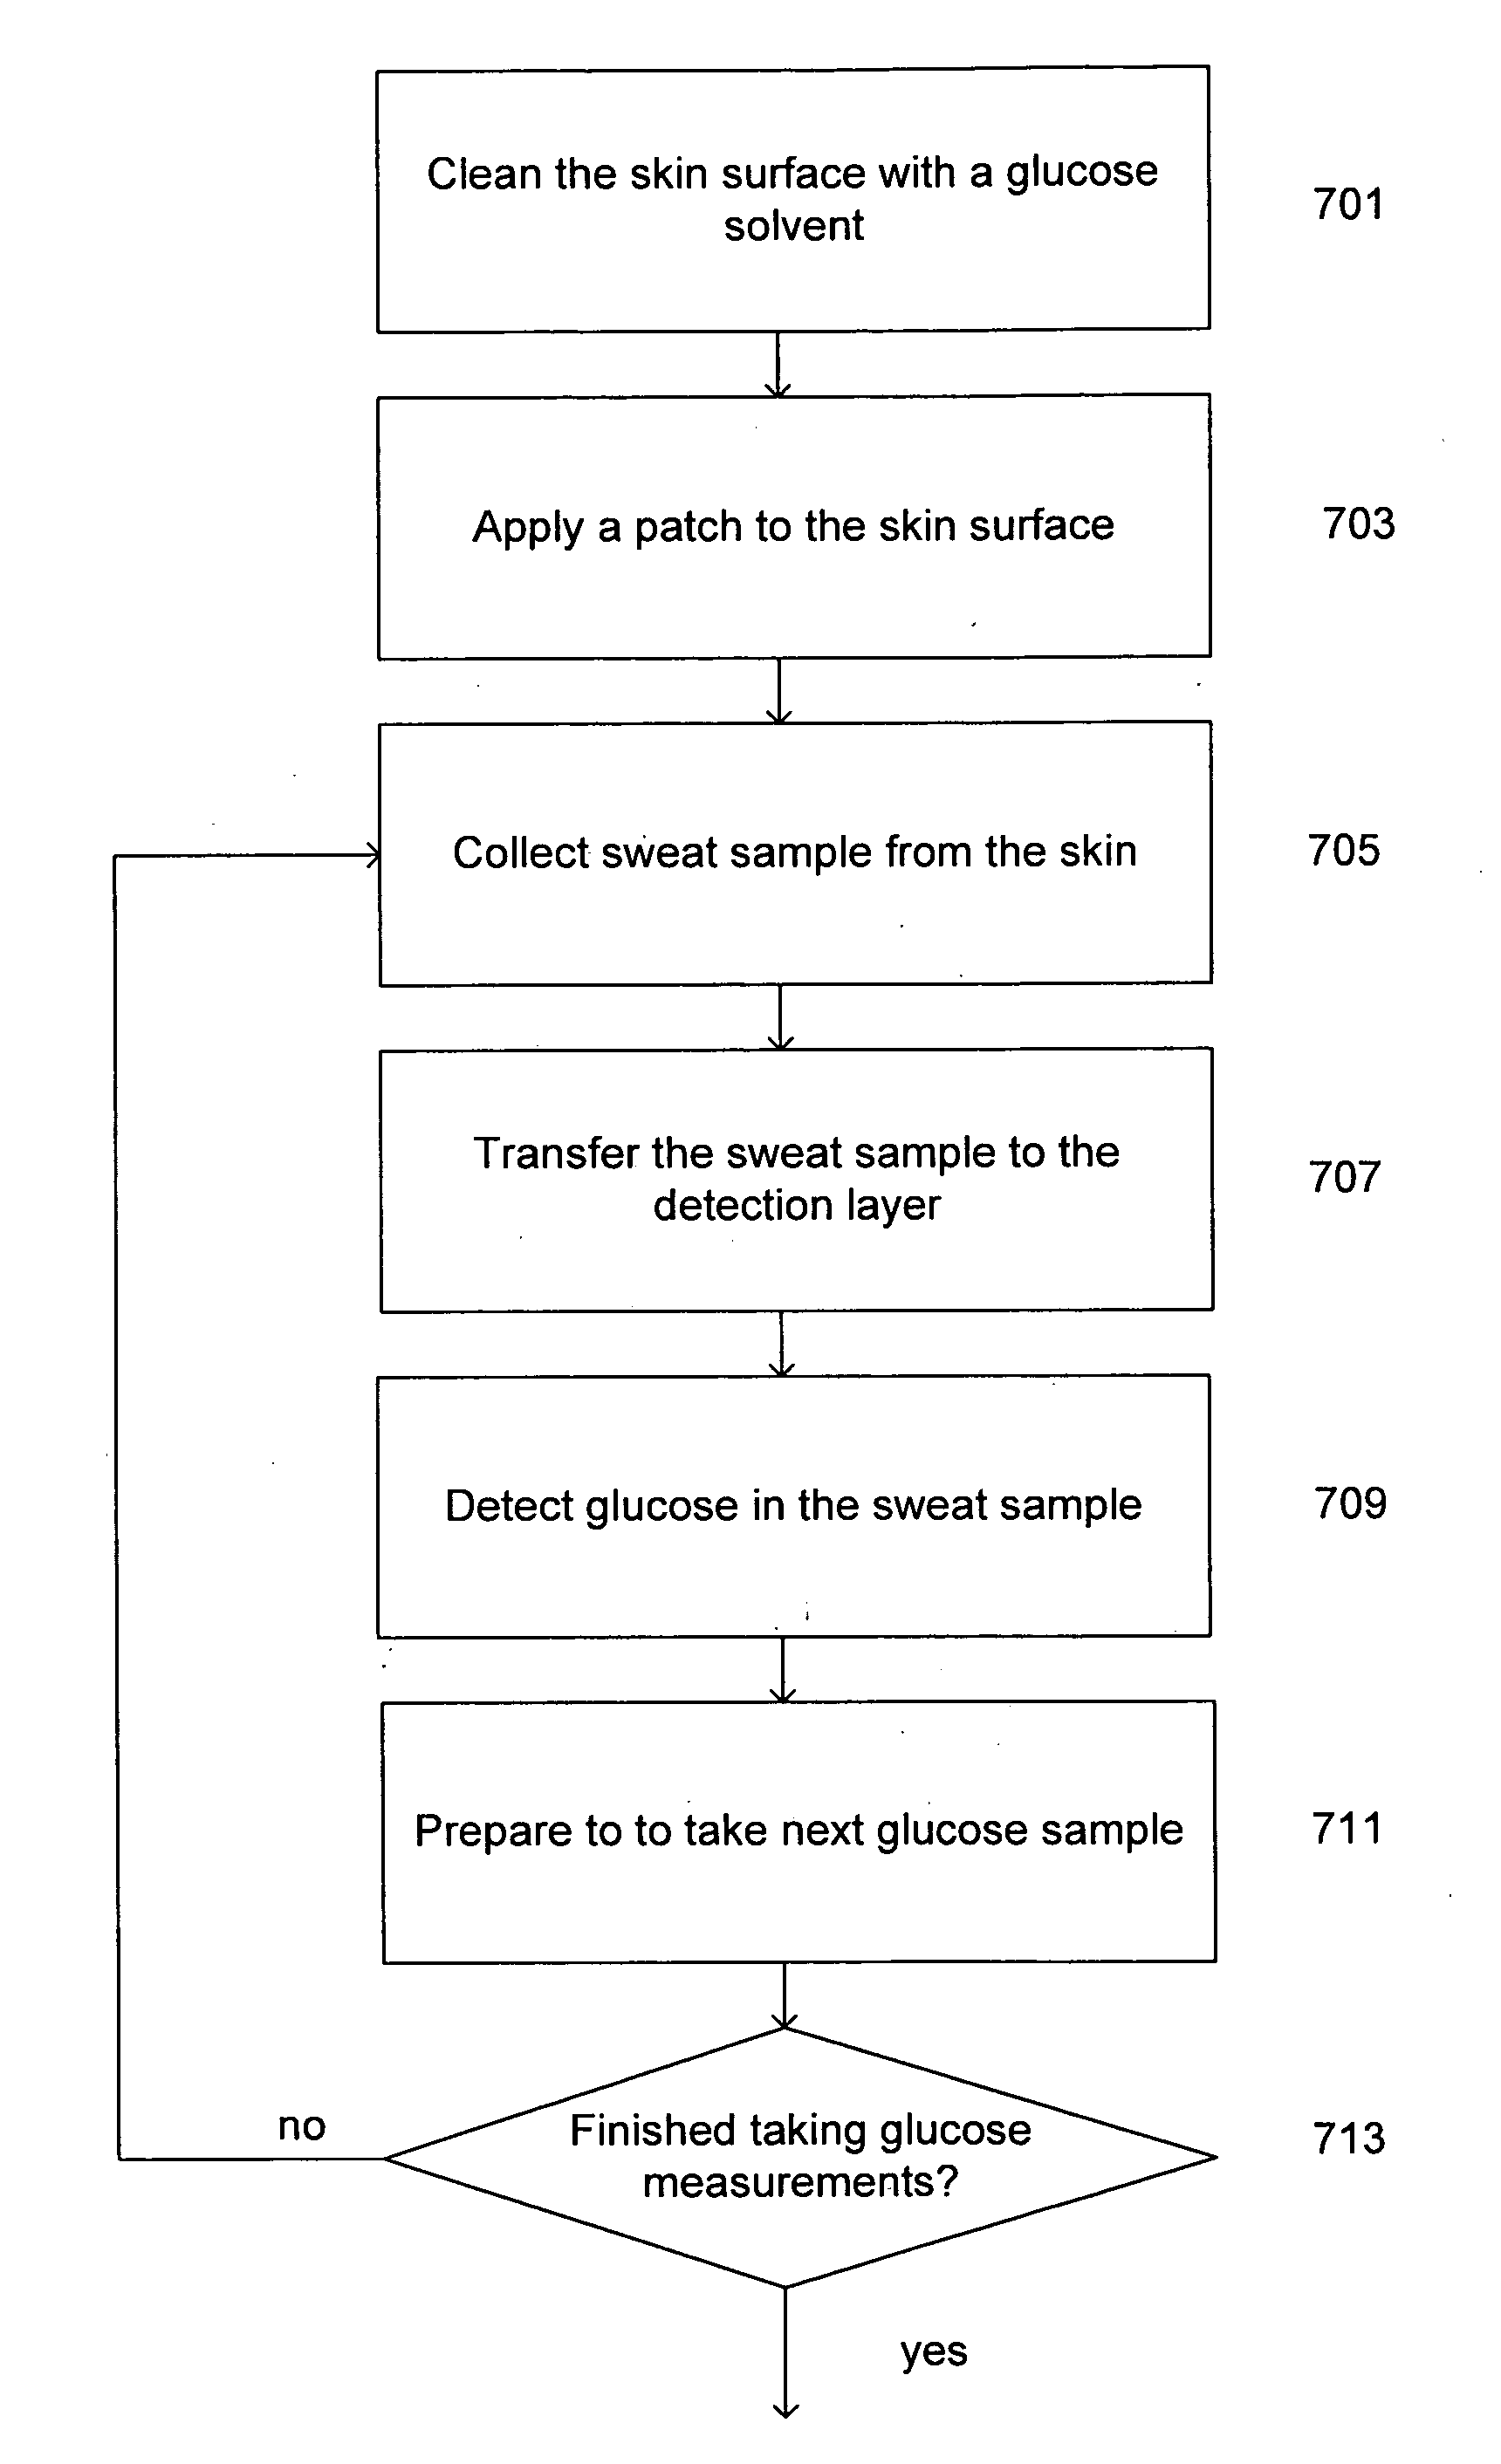 Patches, systems, and methods for non-invasive glucose measurement